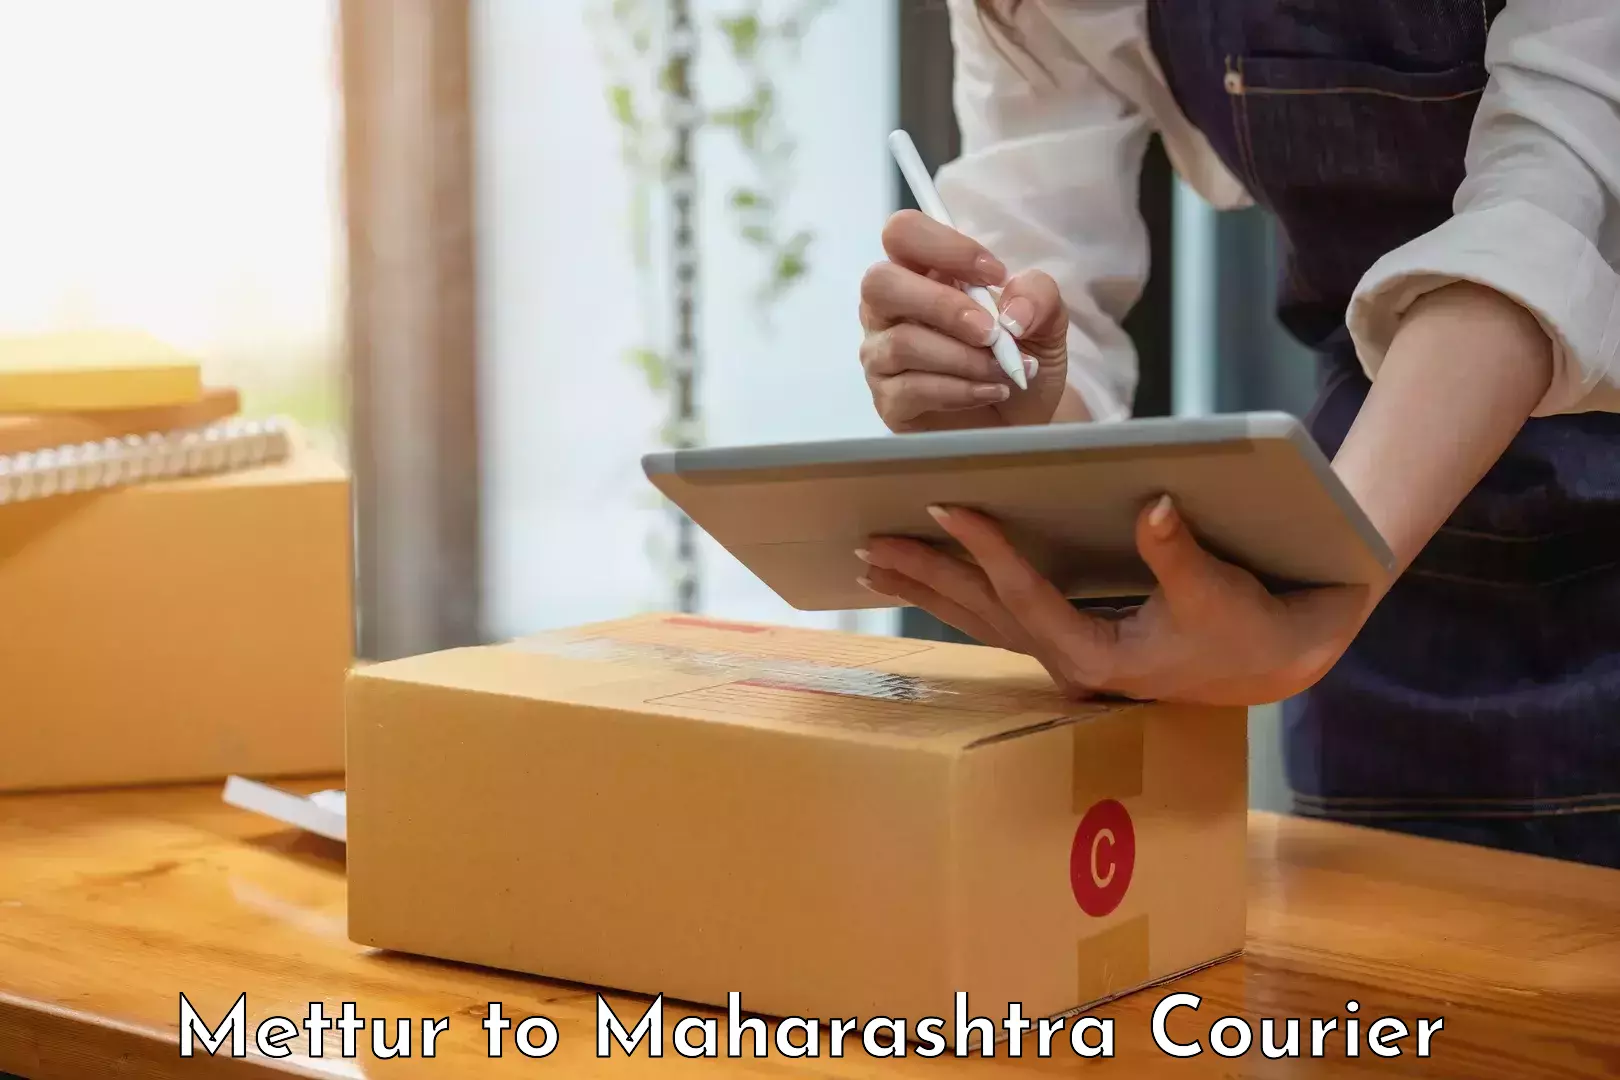 On-call courier service Mettur to Osmanabad